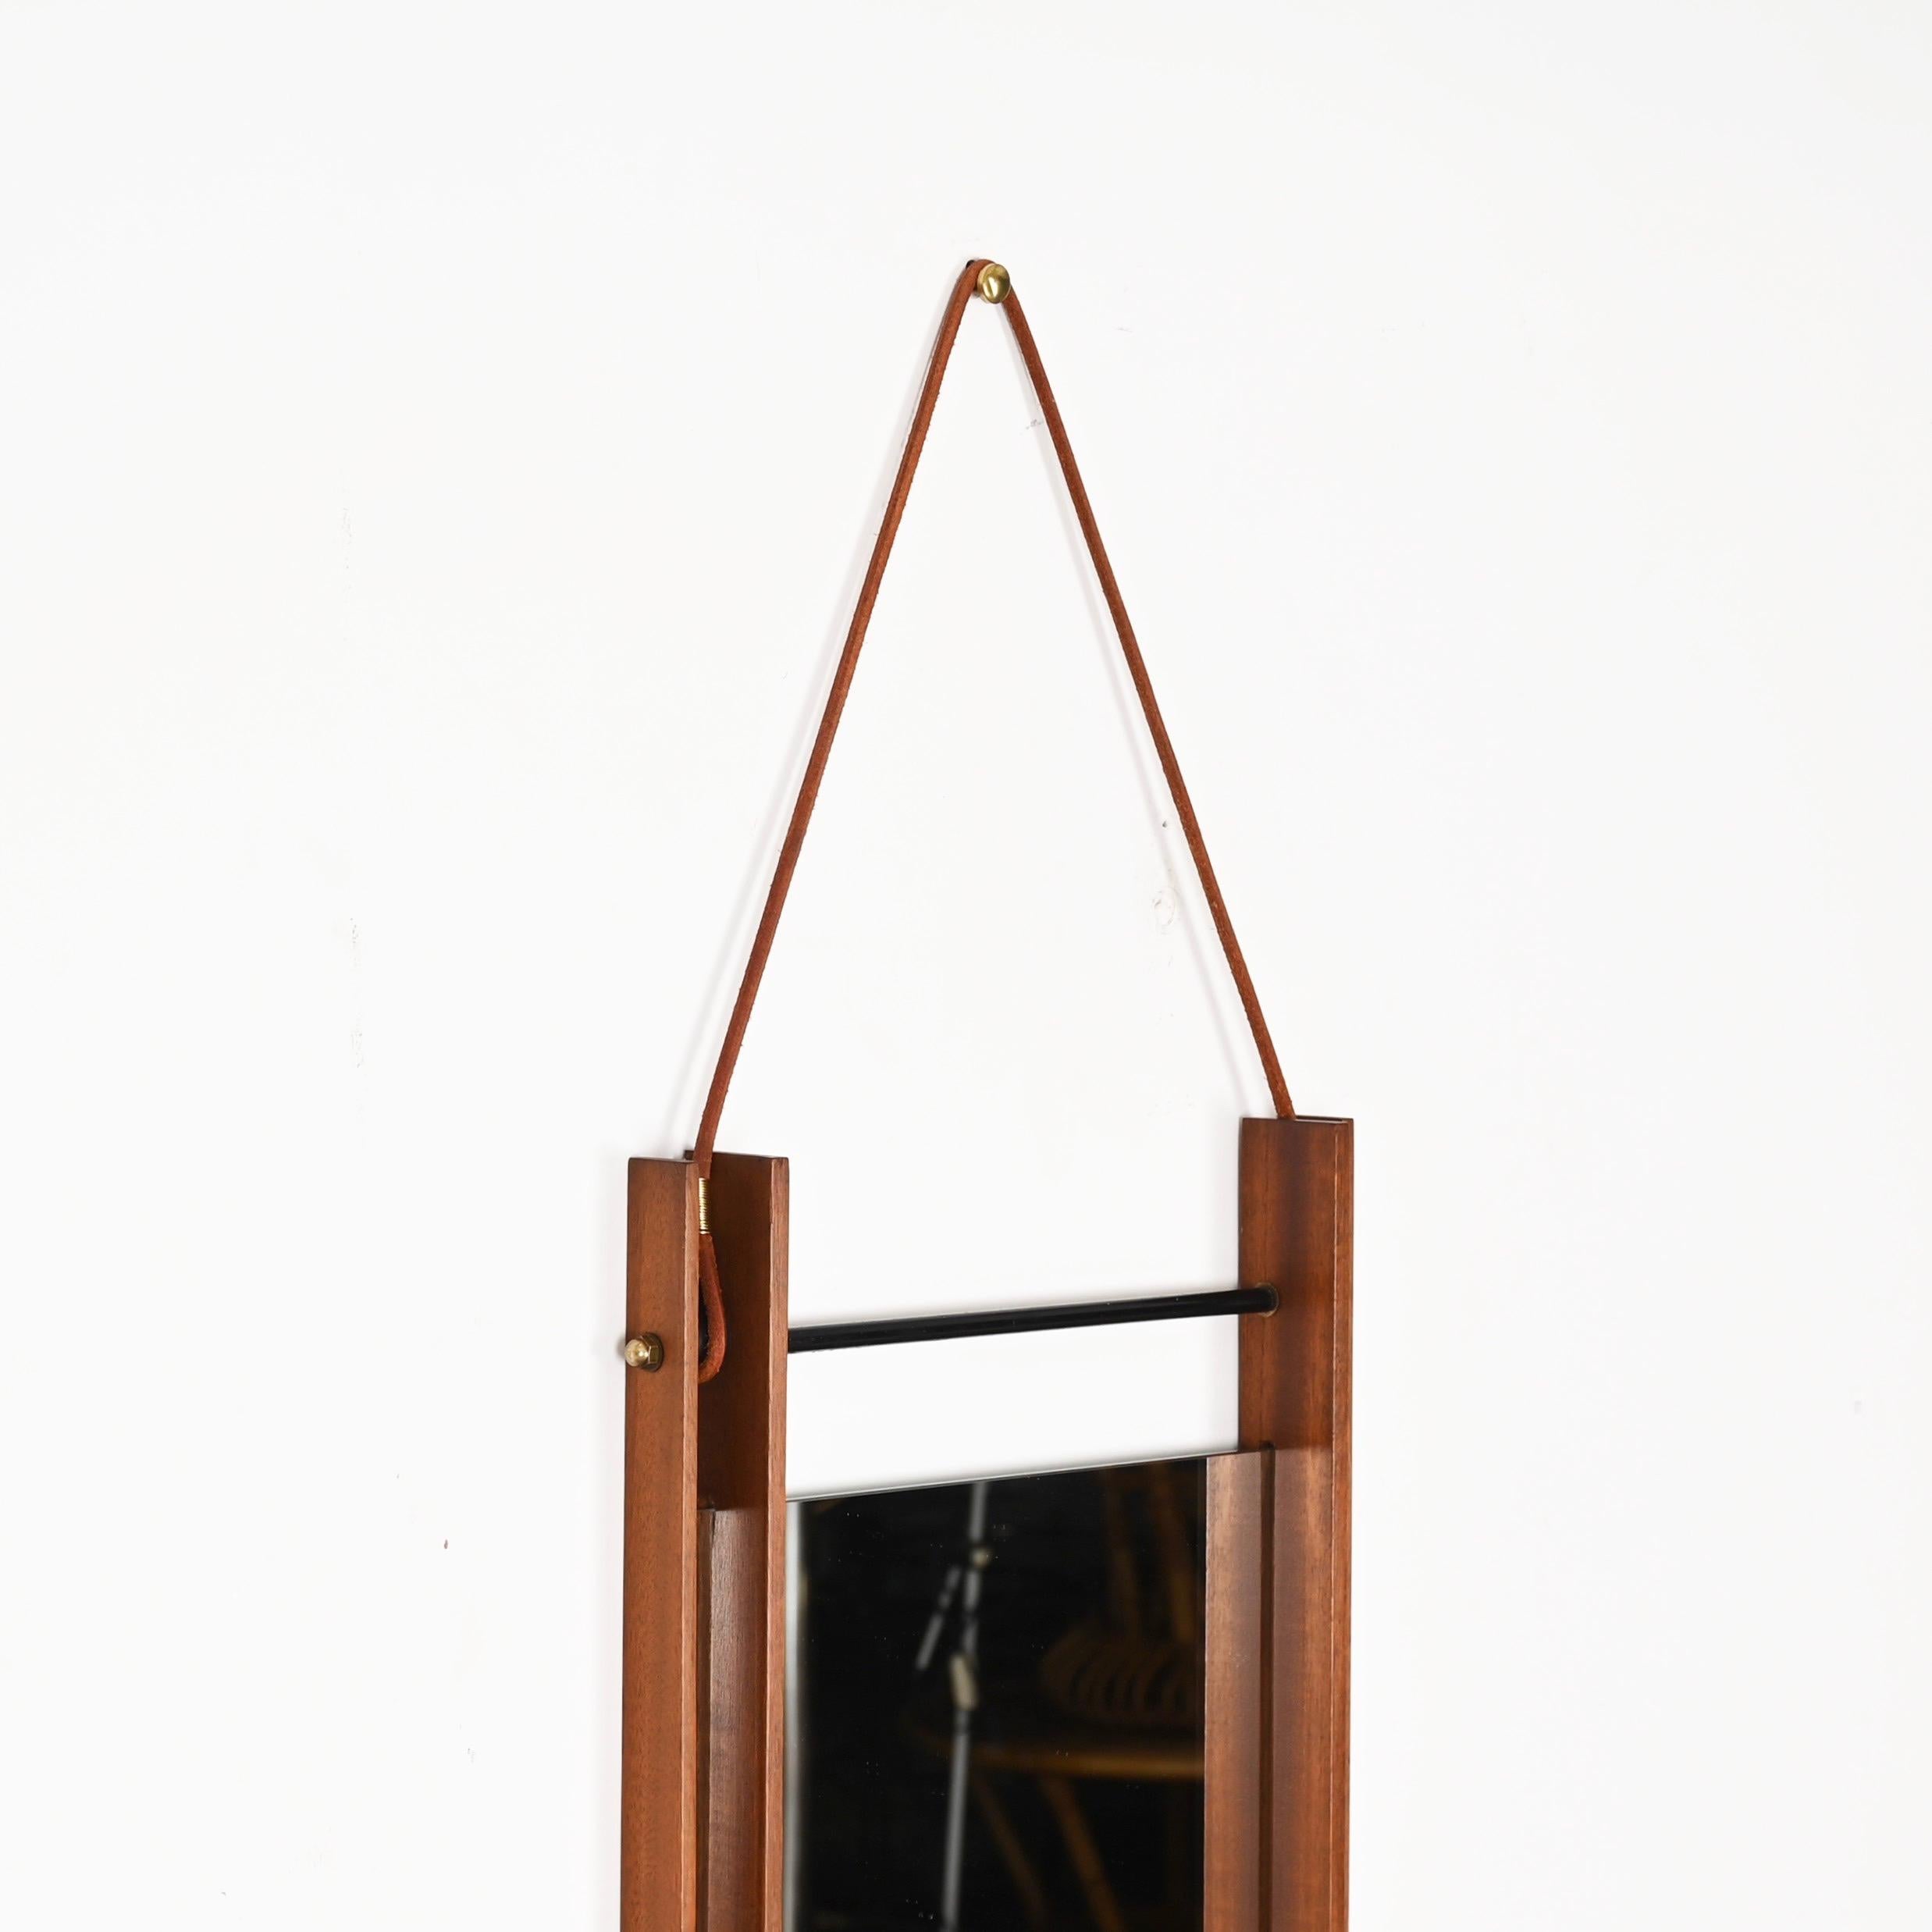 Enameled Rectangular Mirror with Double Teak Frame, Leather and Brass, Italy, 1970s For Sale